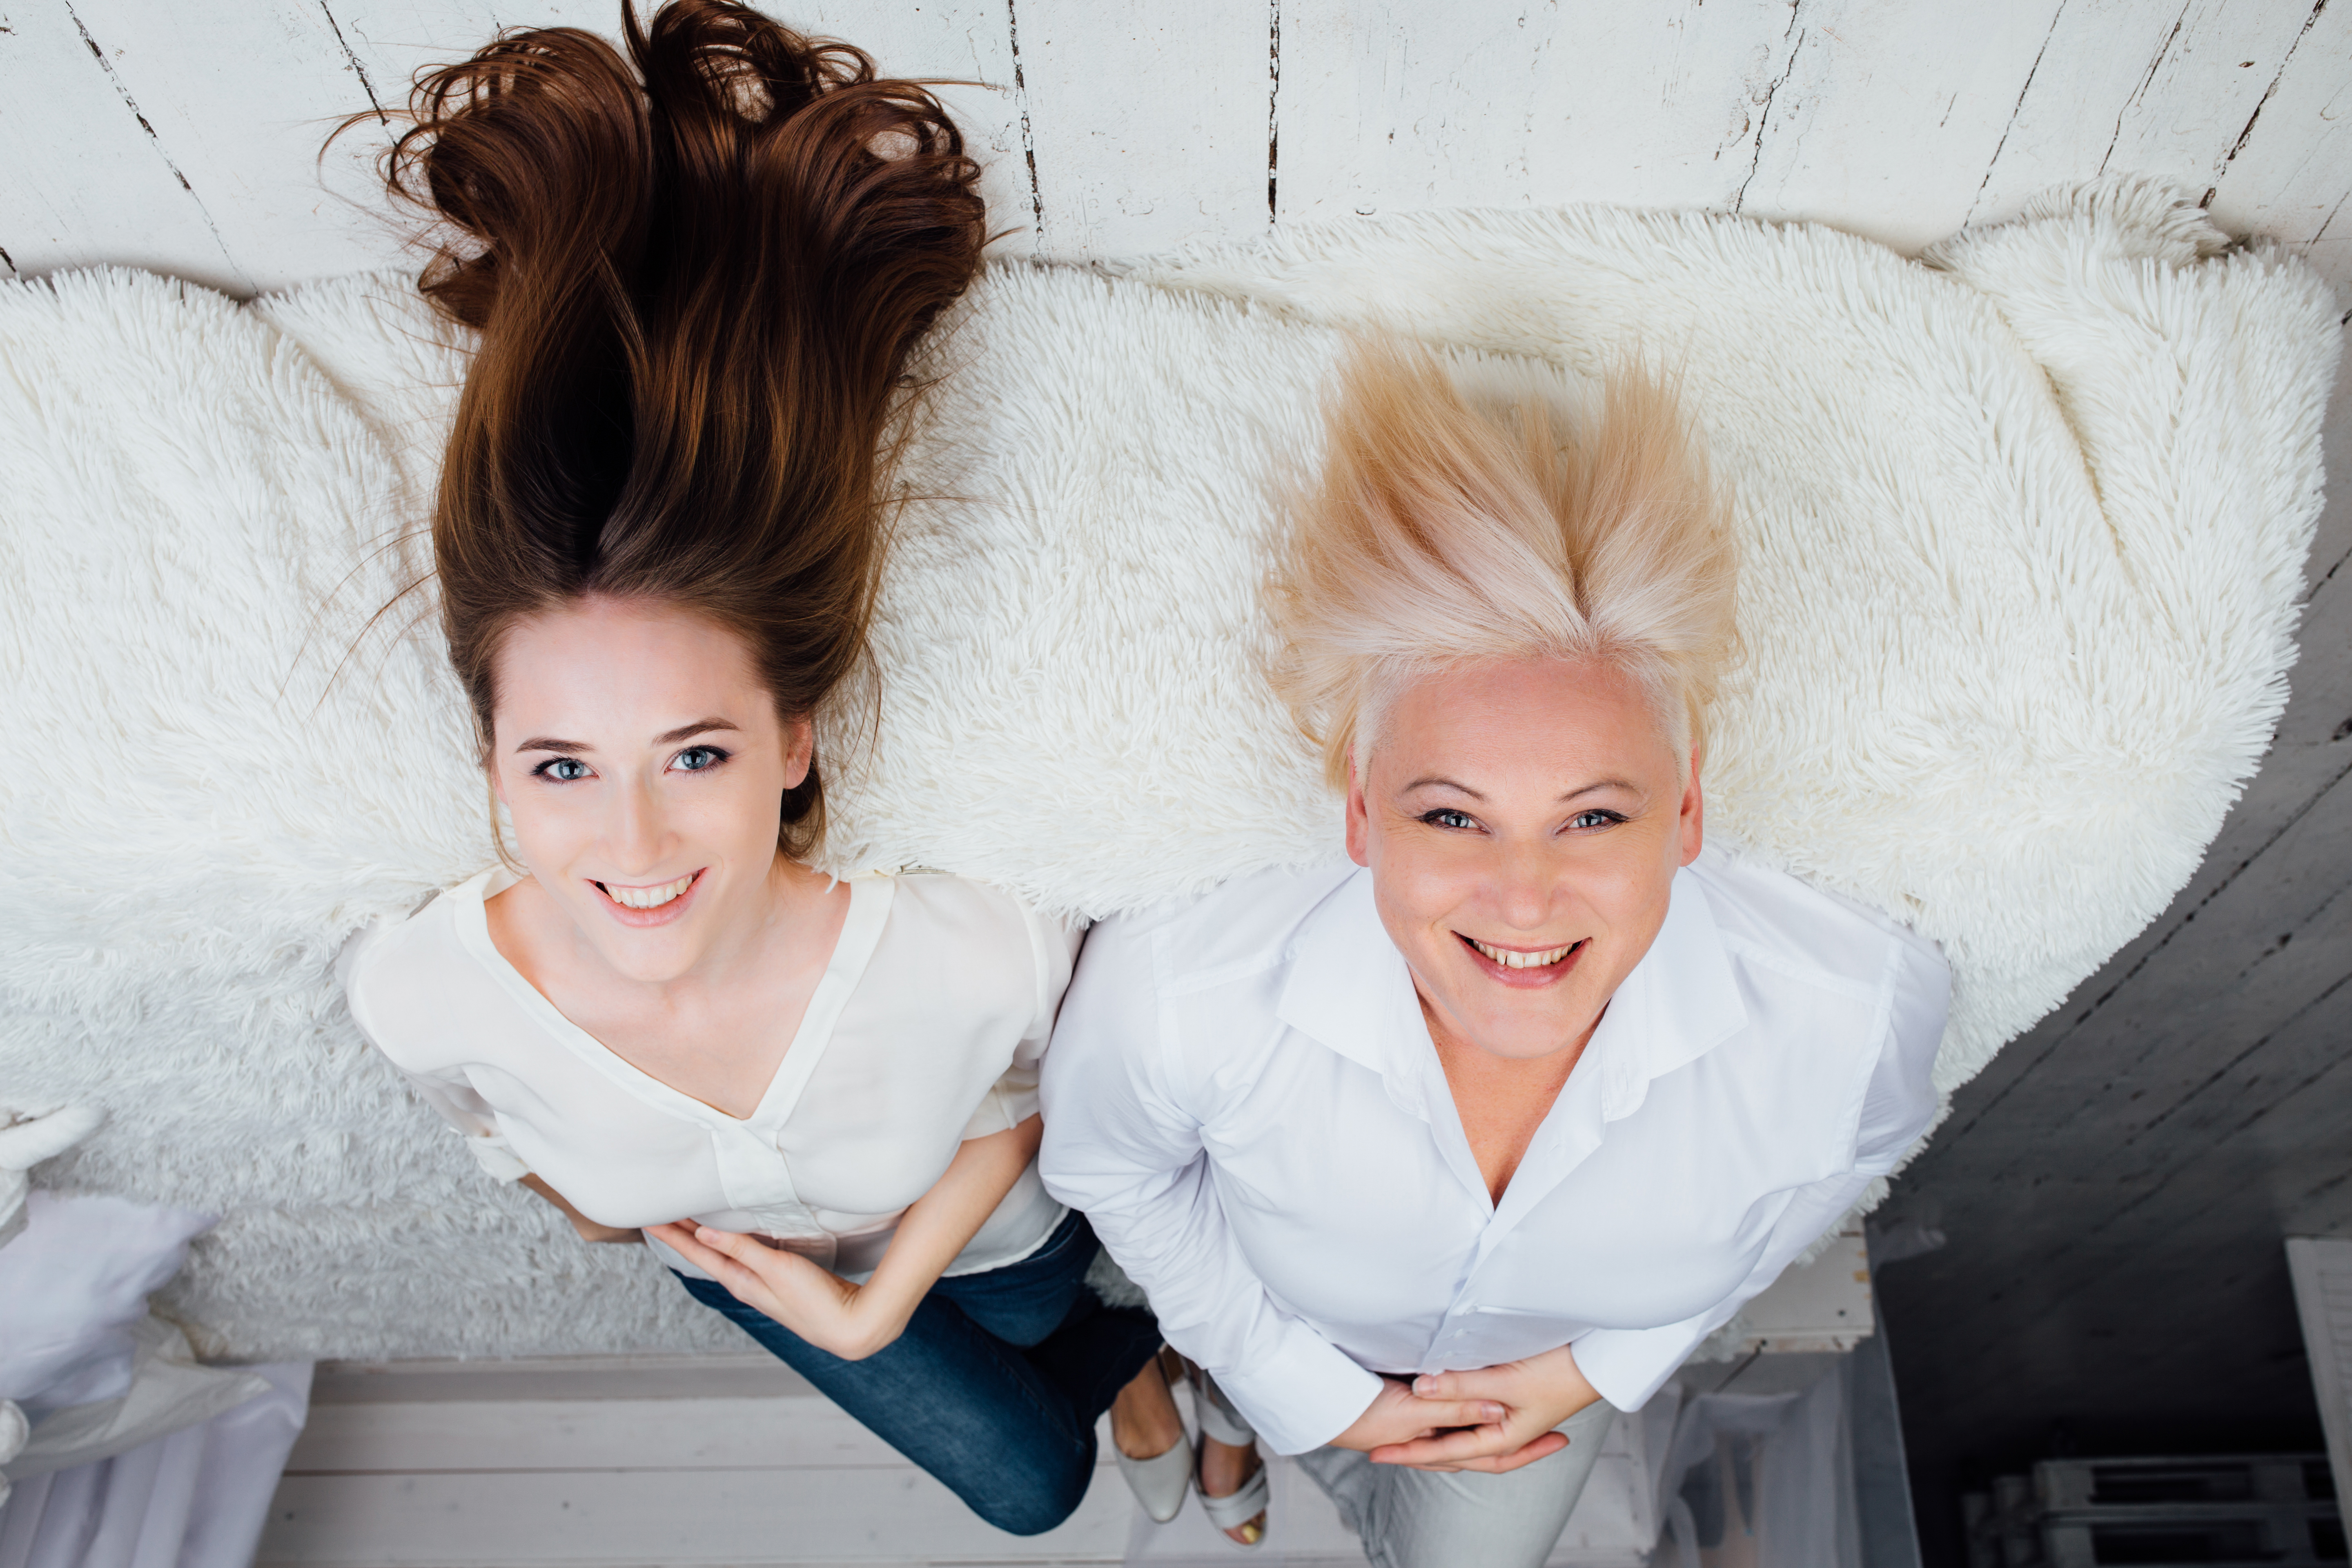 Mother and daughter lying on bed while smiling at the camera | Source: Shutterstock